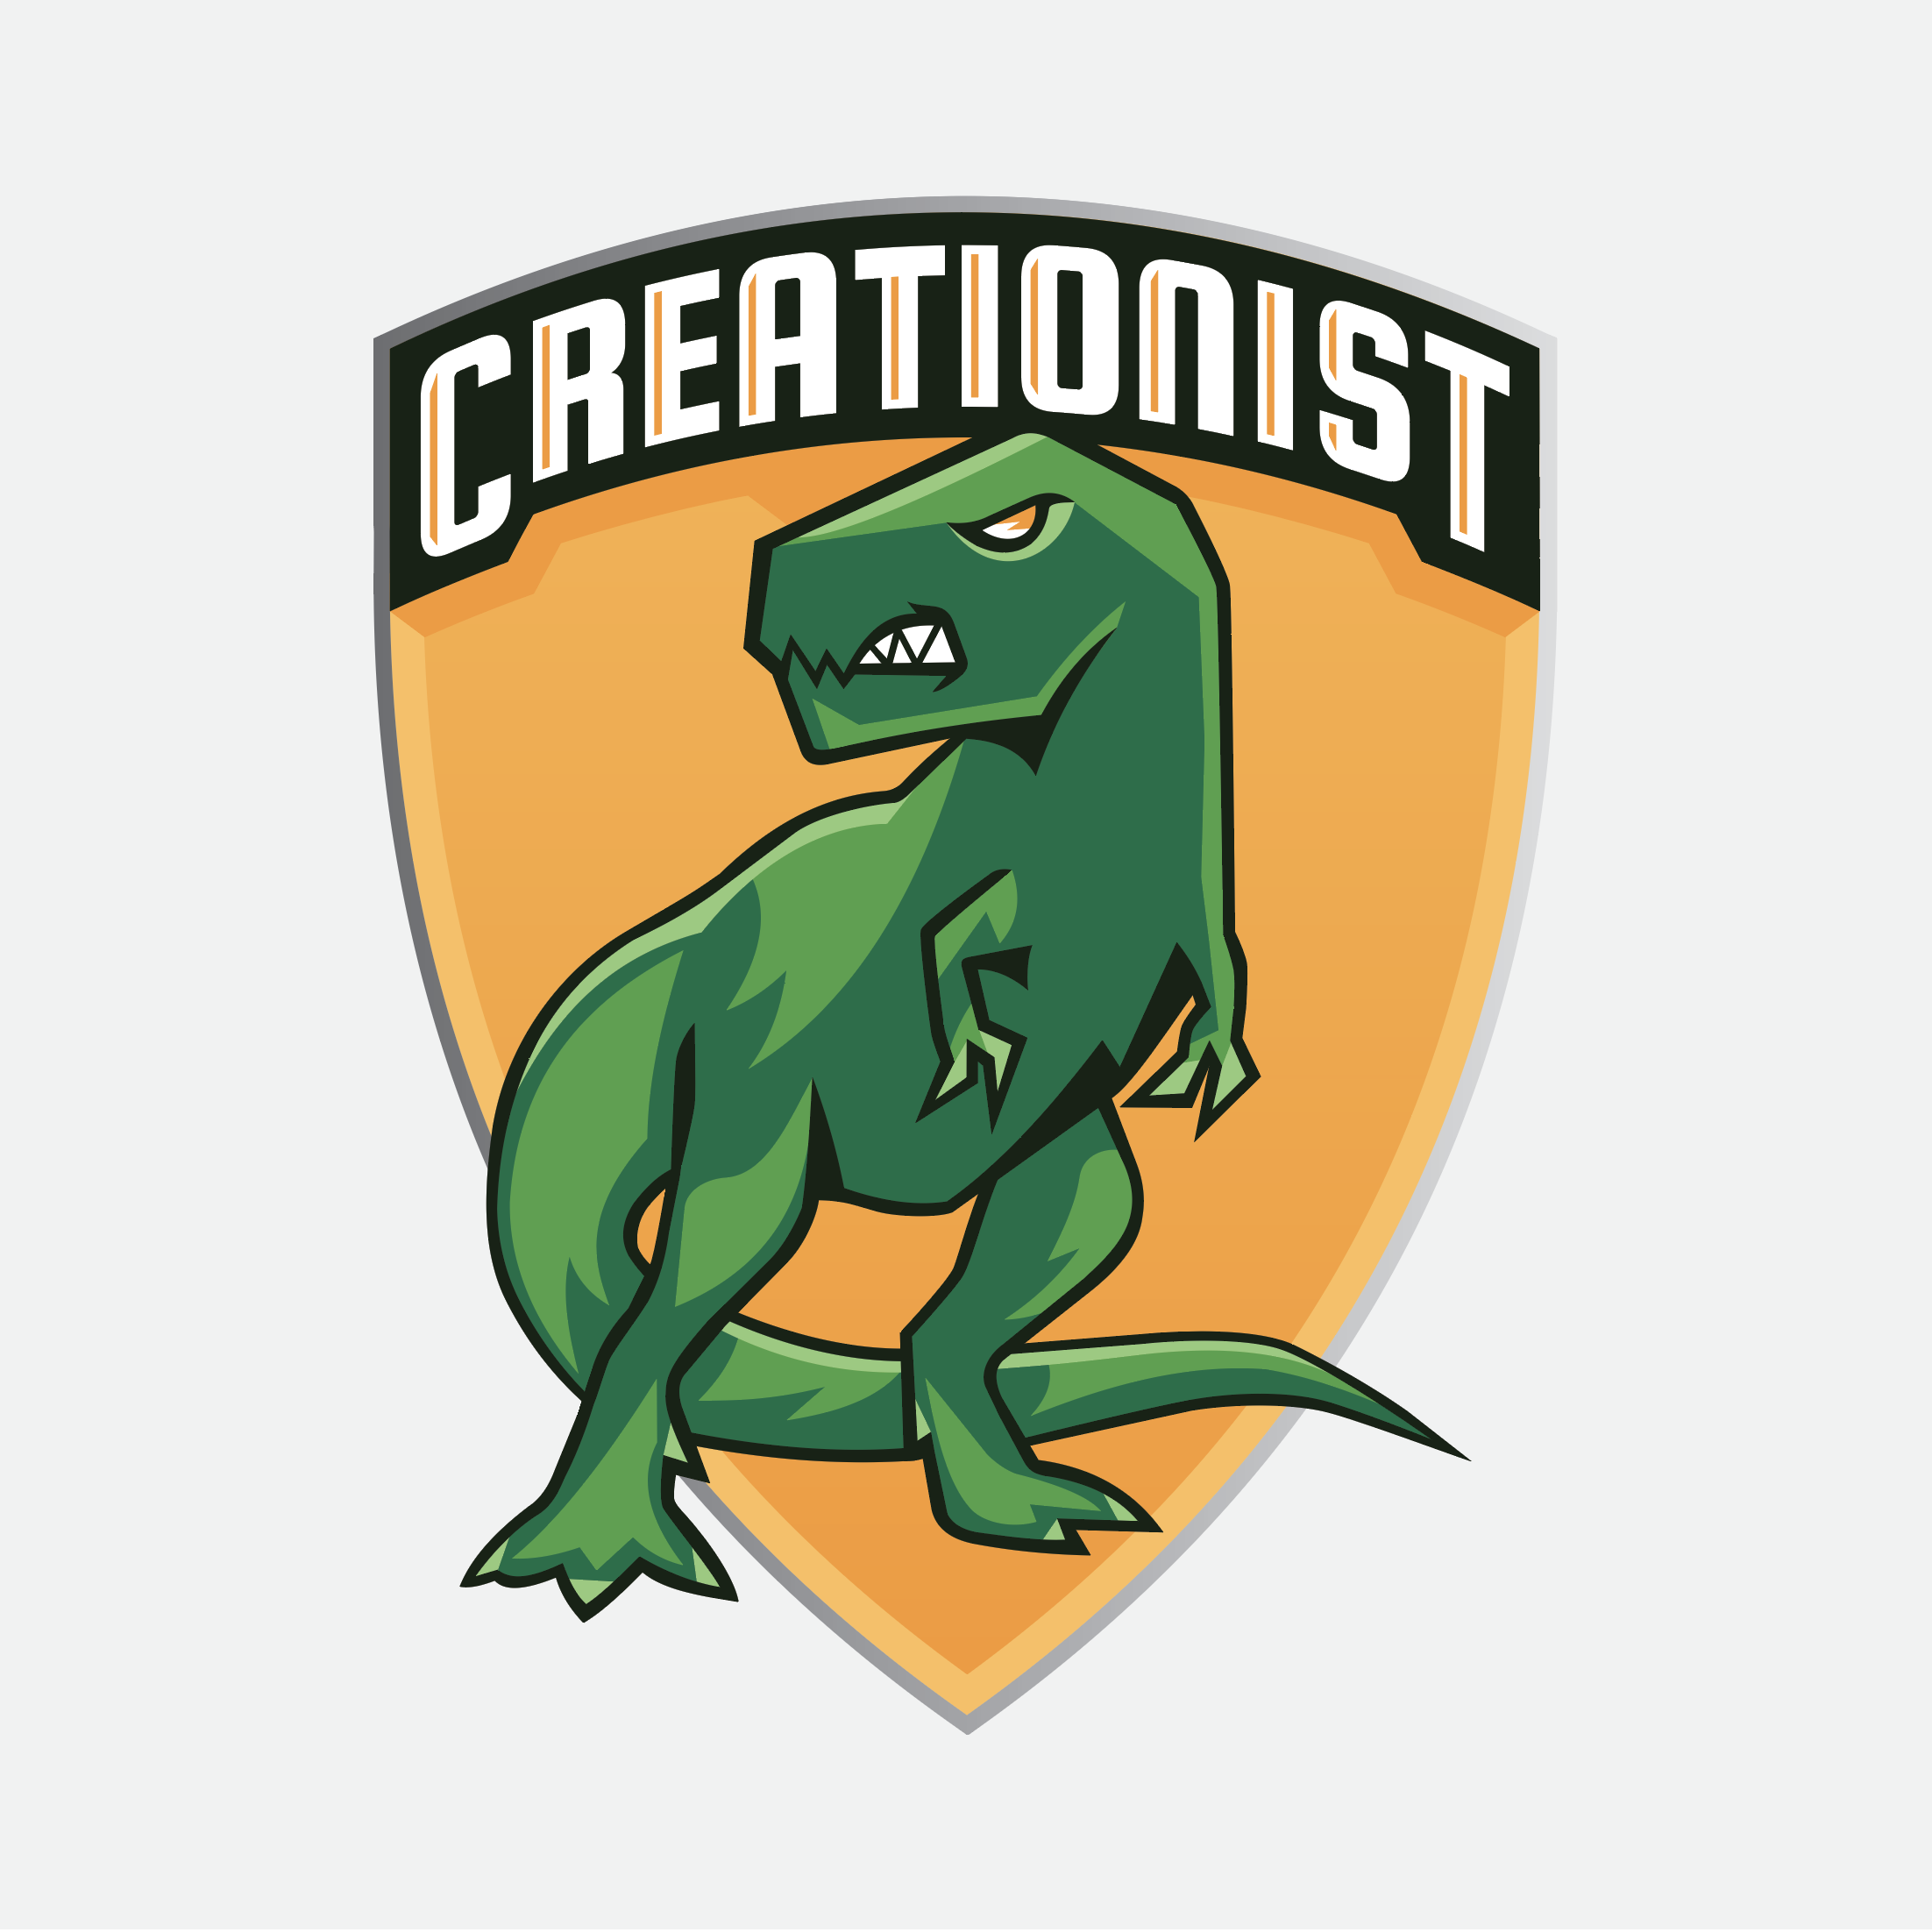 Creationist Product Theme